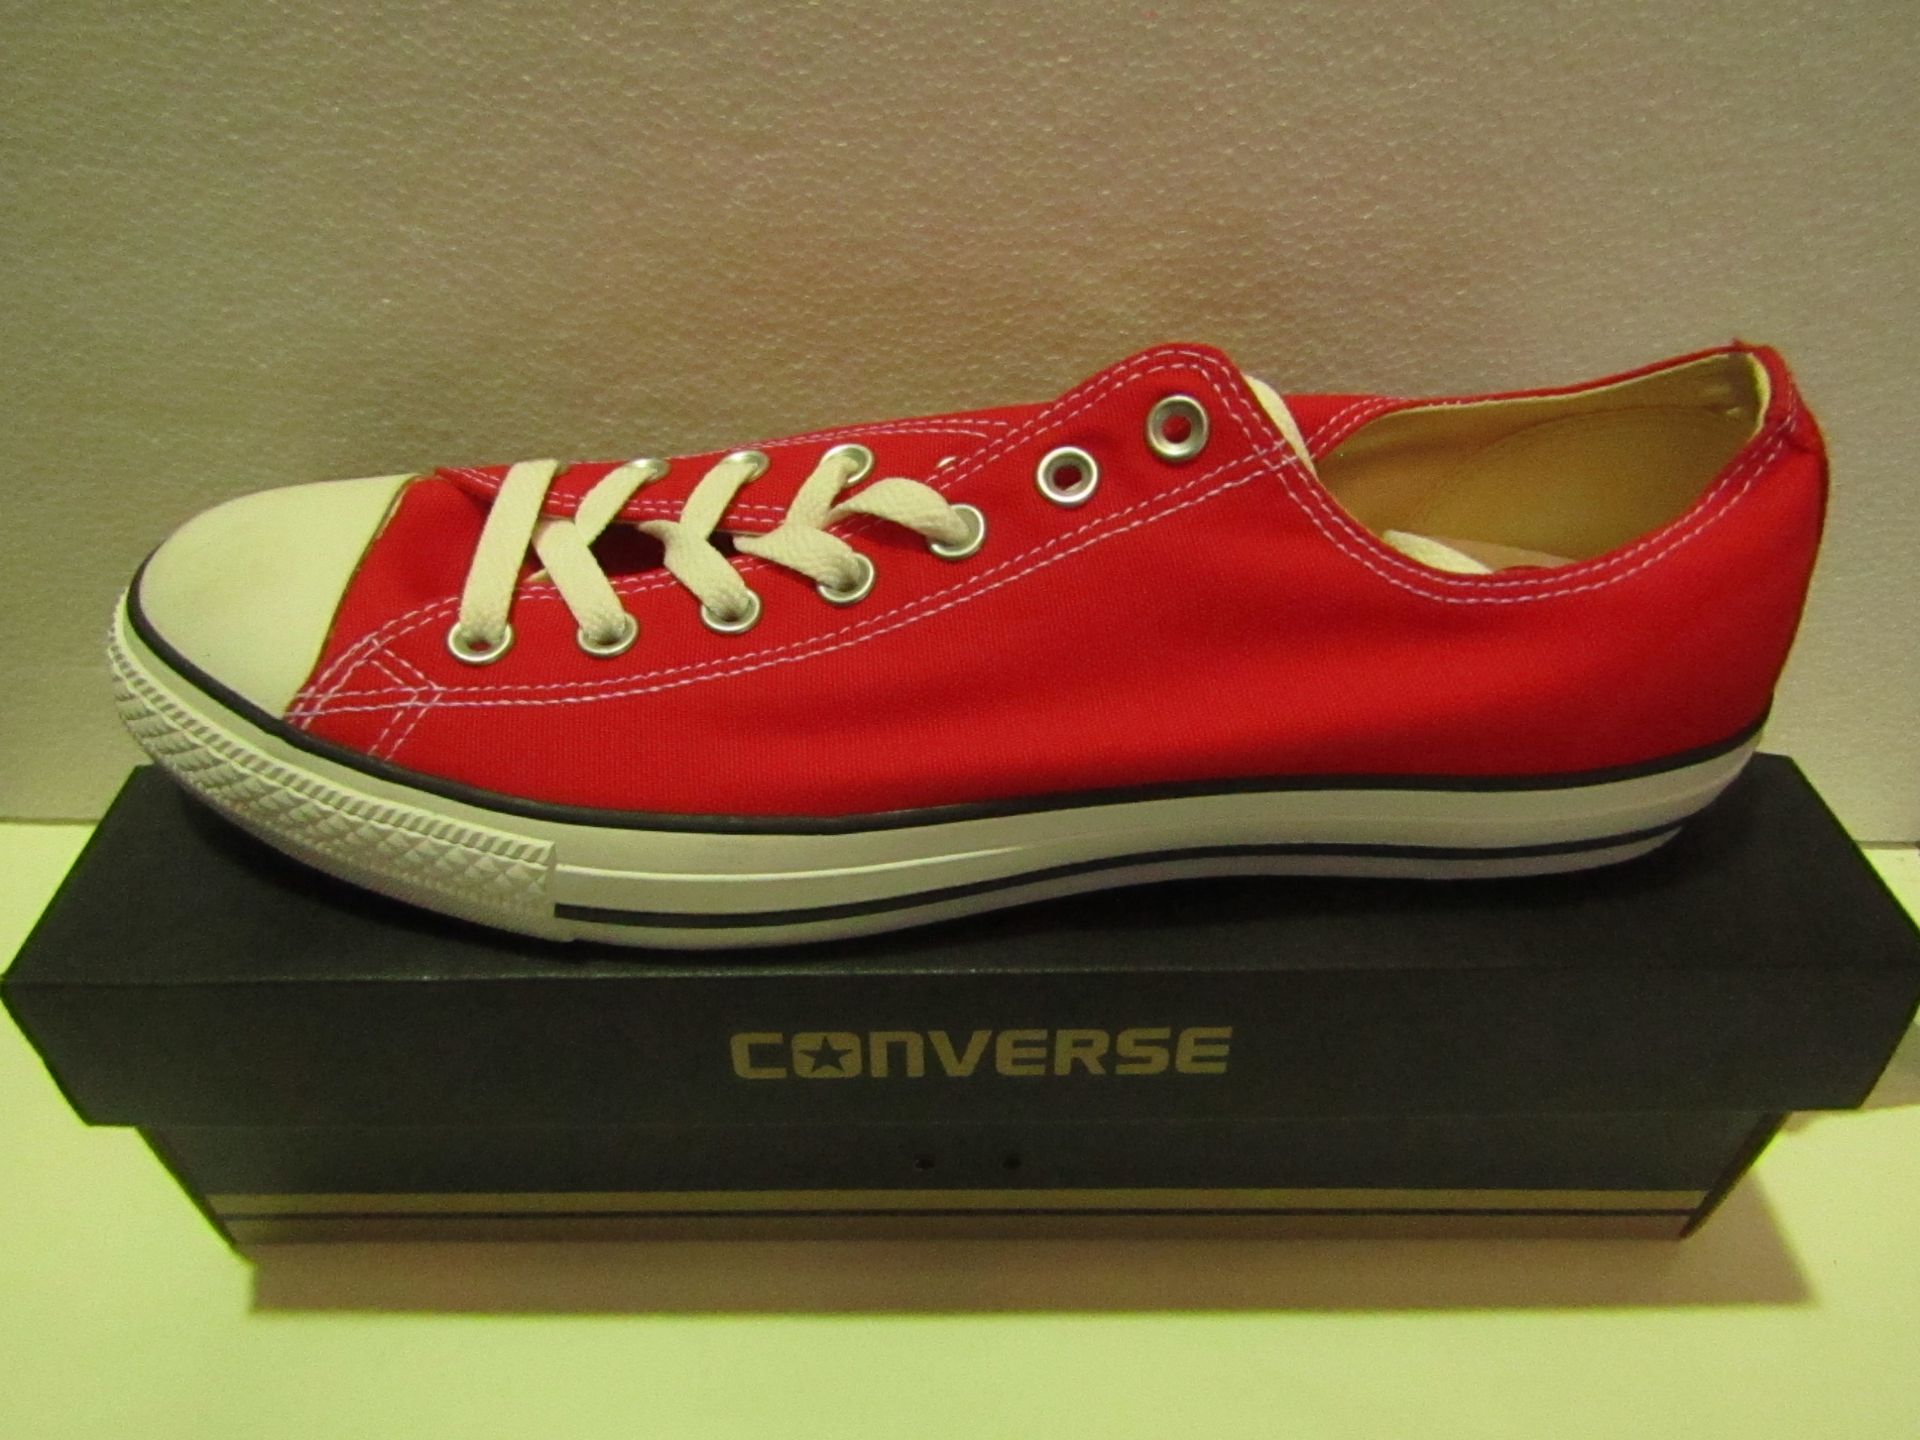 Converse All Star Red Canvas Trainer size UK 12 new & boxed see image for design